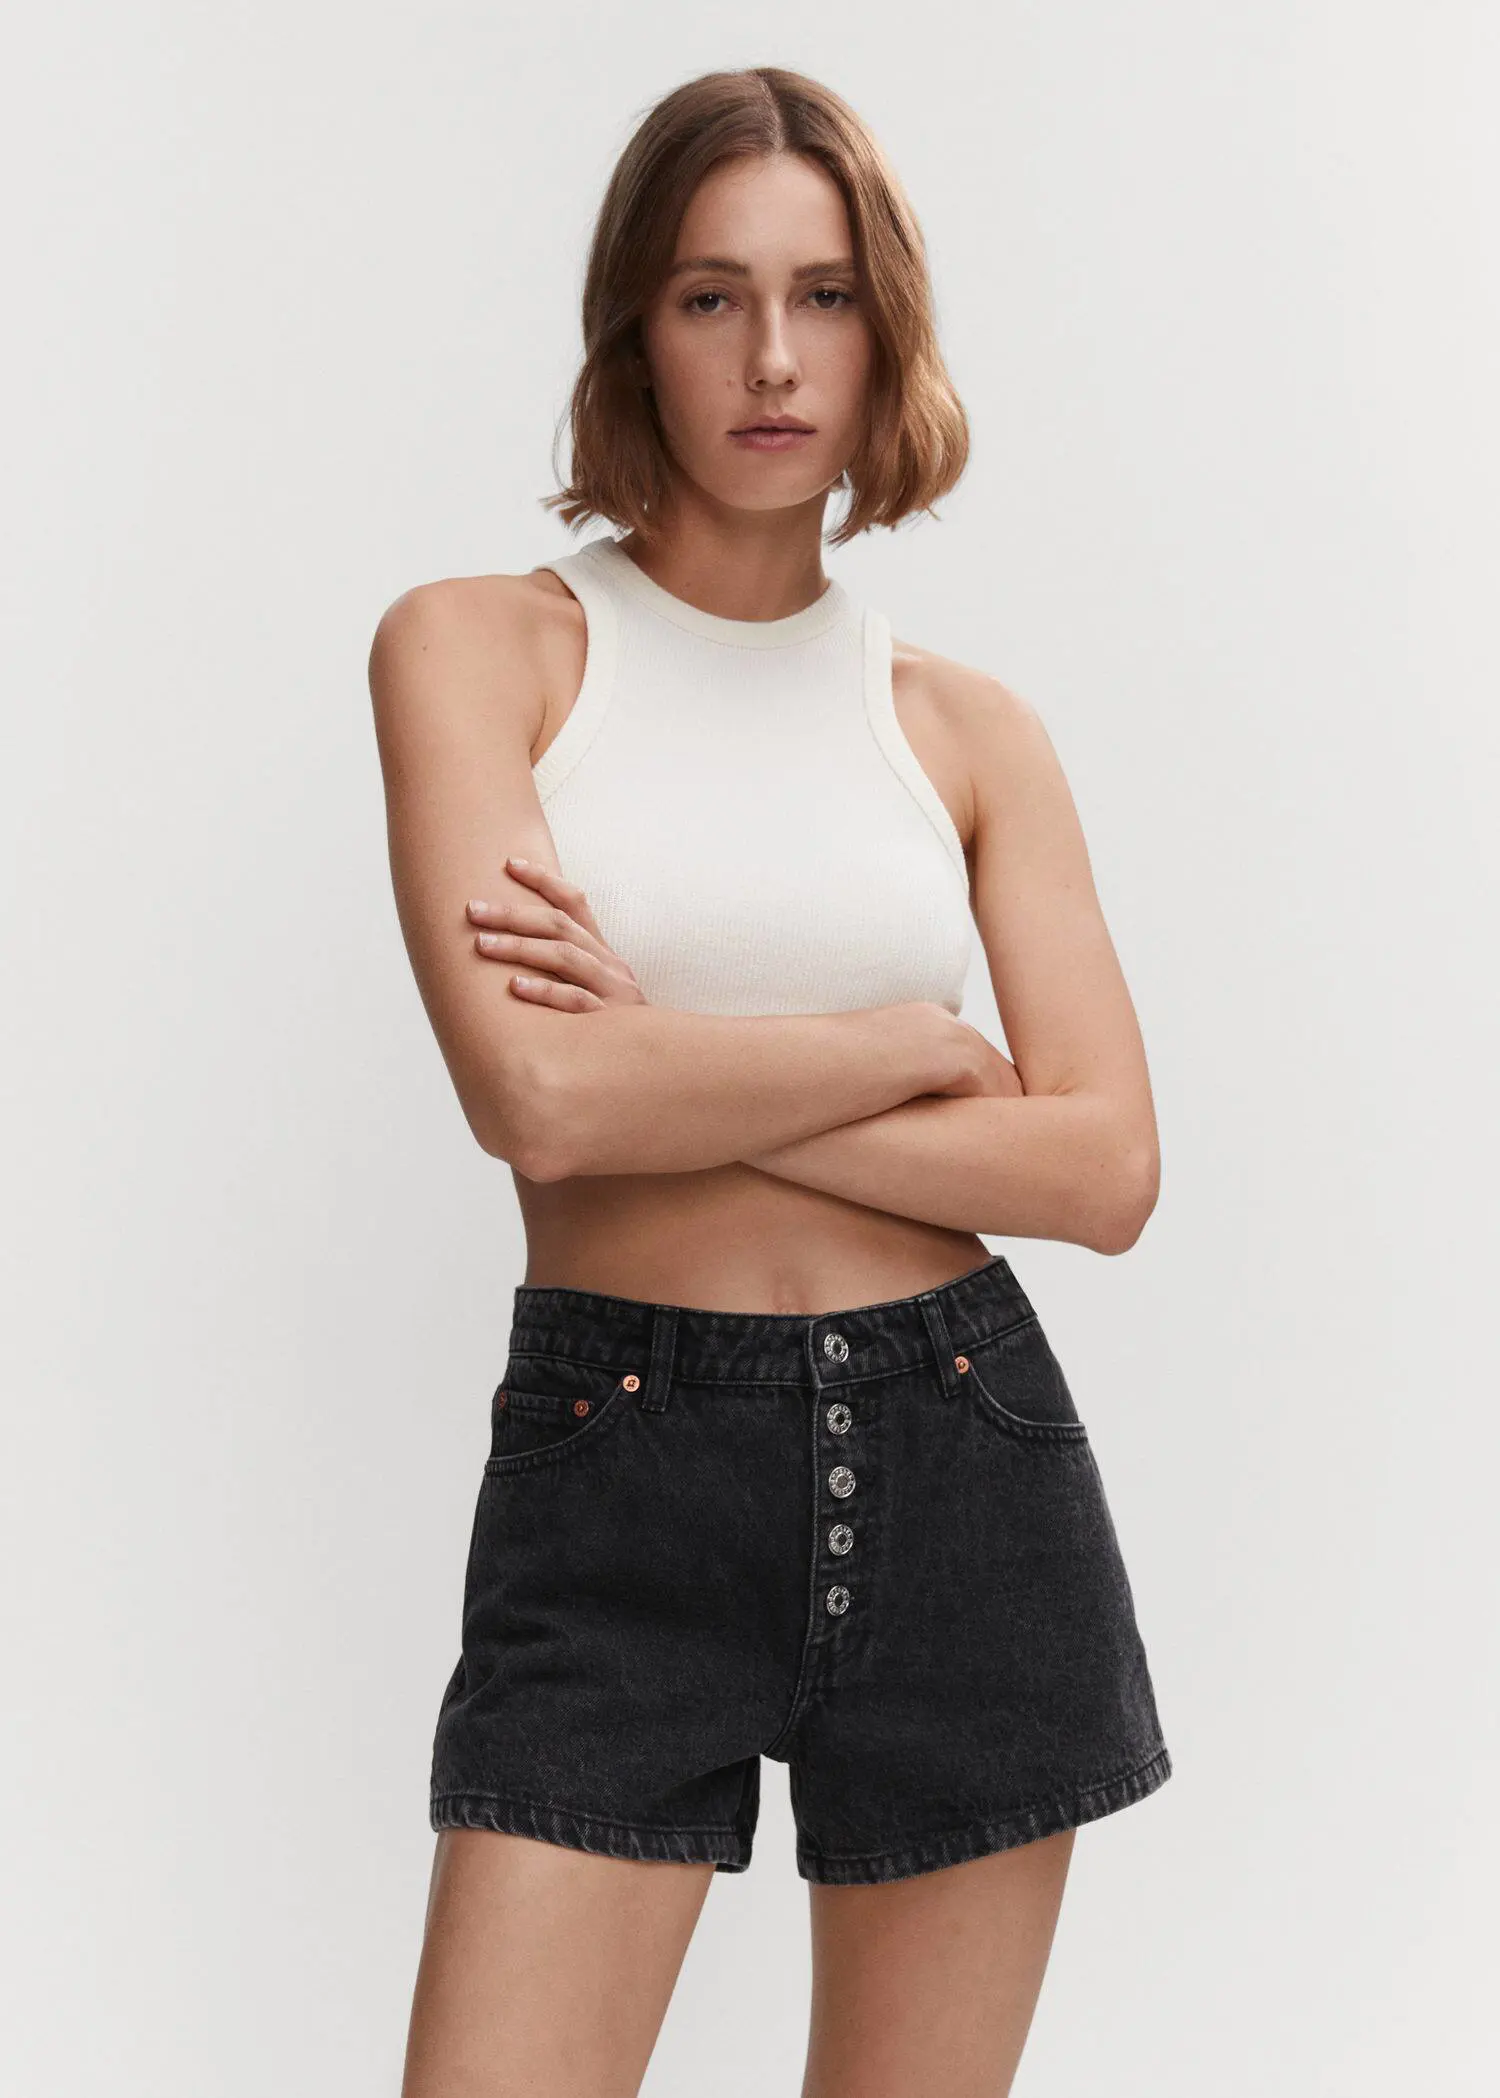 Mango Denim shorts with buttons. a woman in a white crop top and black shorts. 